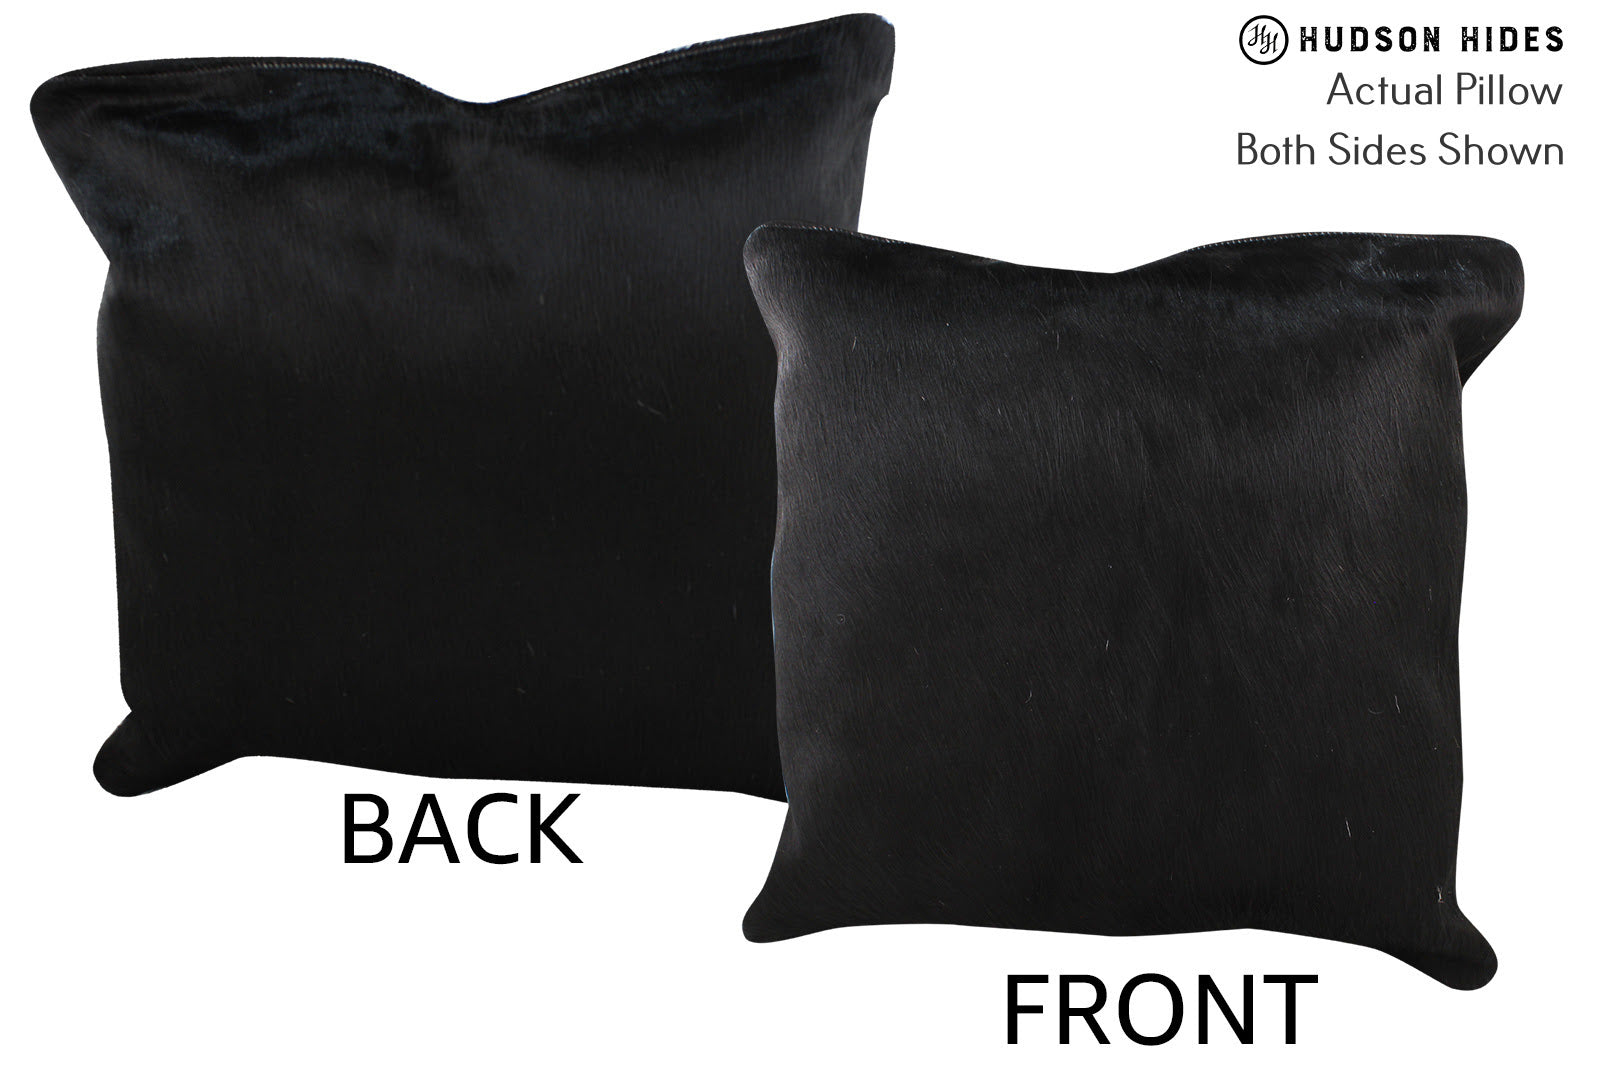 Solid Black Cowhide Pillow #76318